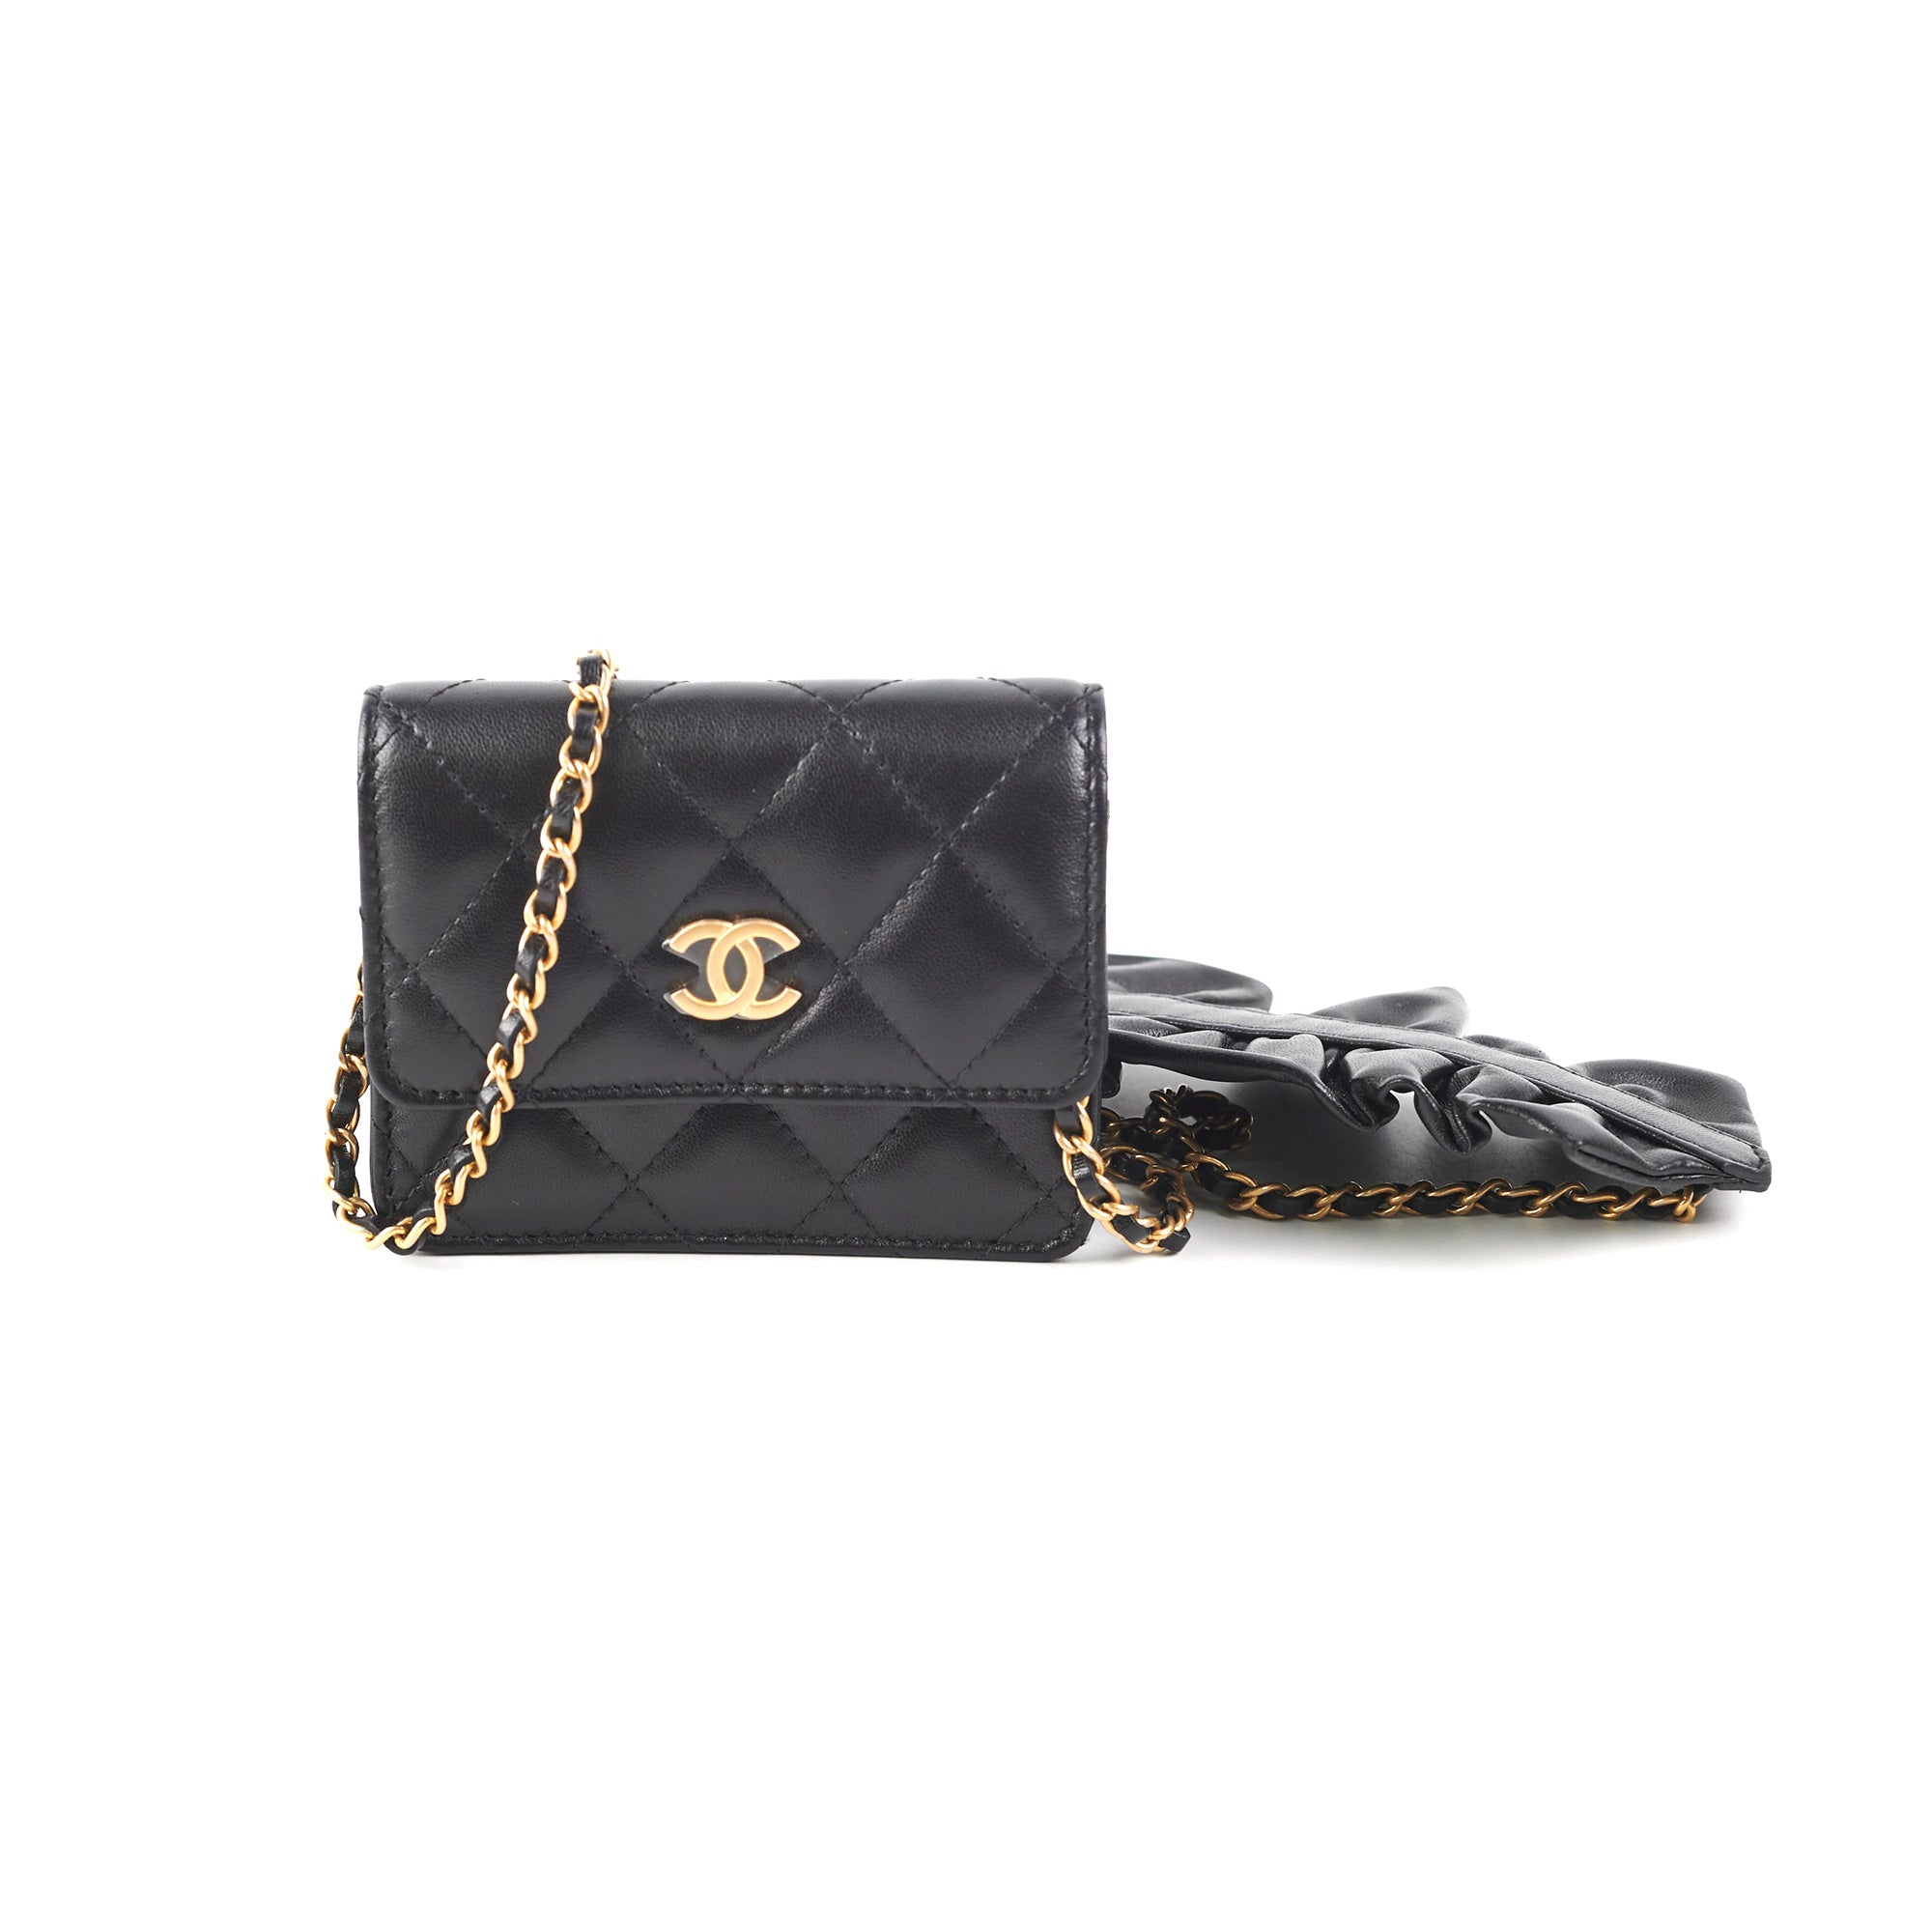 Authentic CHANEL Classic Flap Card Holder Black Caviar Leather SHW Brand  New  eBay